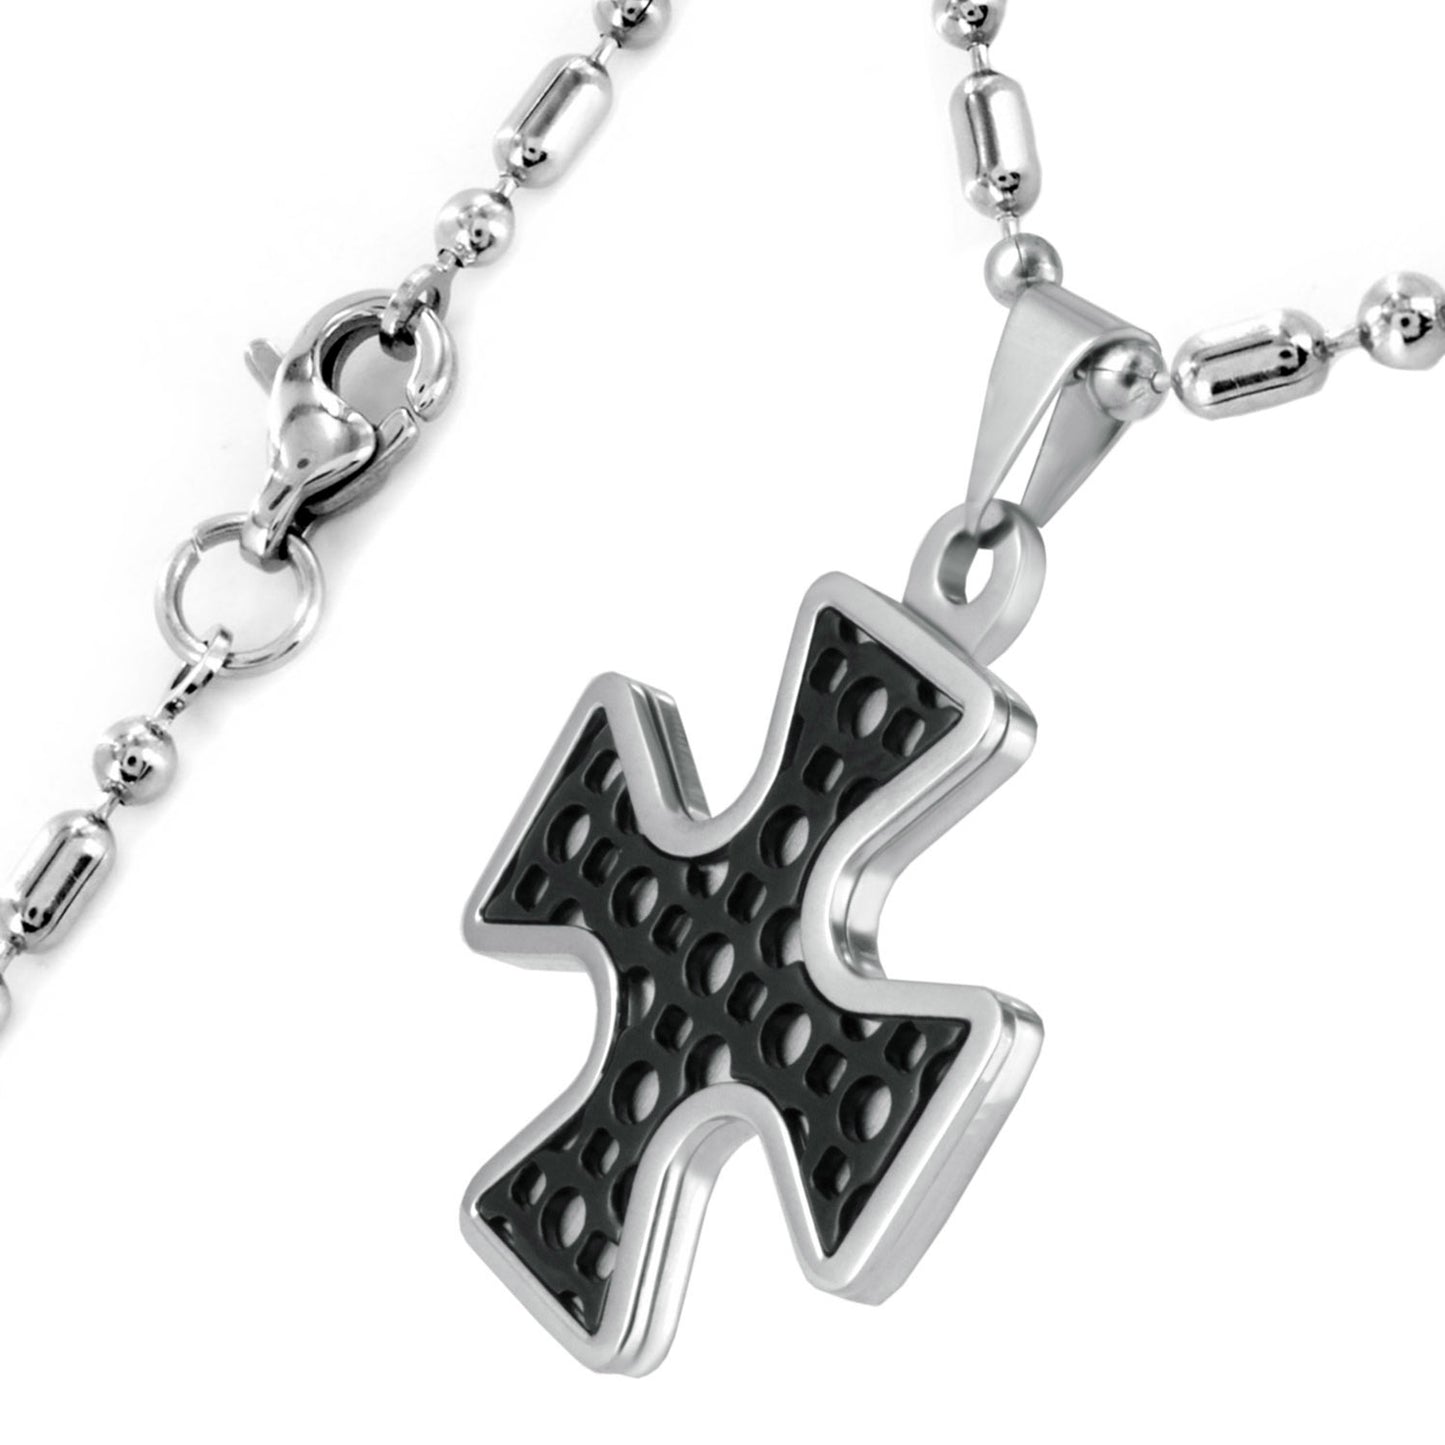 Men's Two-Tone Stainless Steel Cross Pendant Necklace - 24"